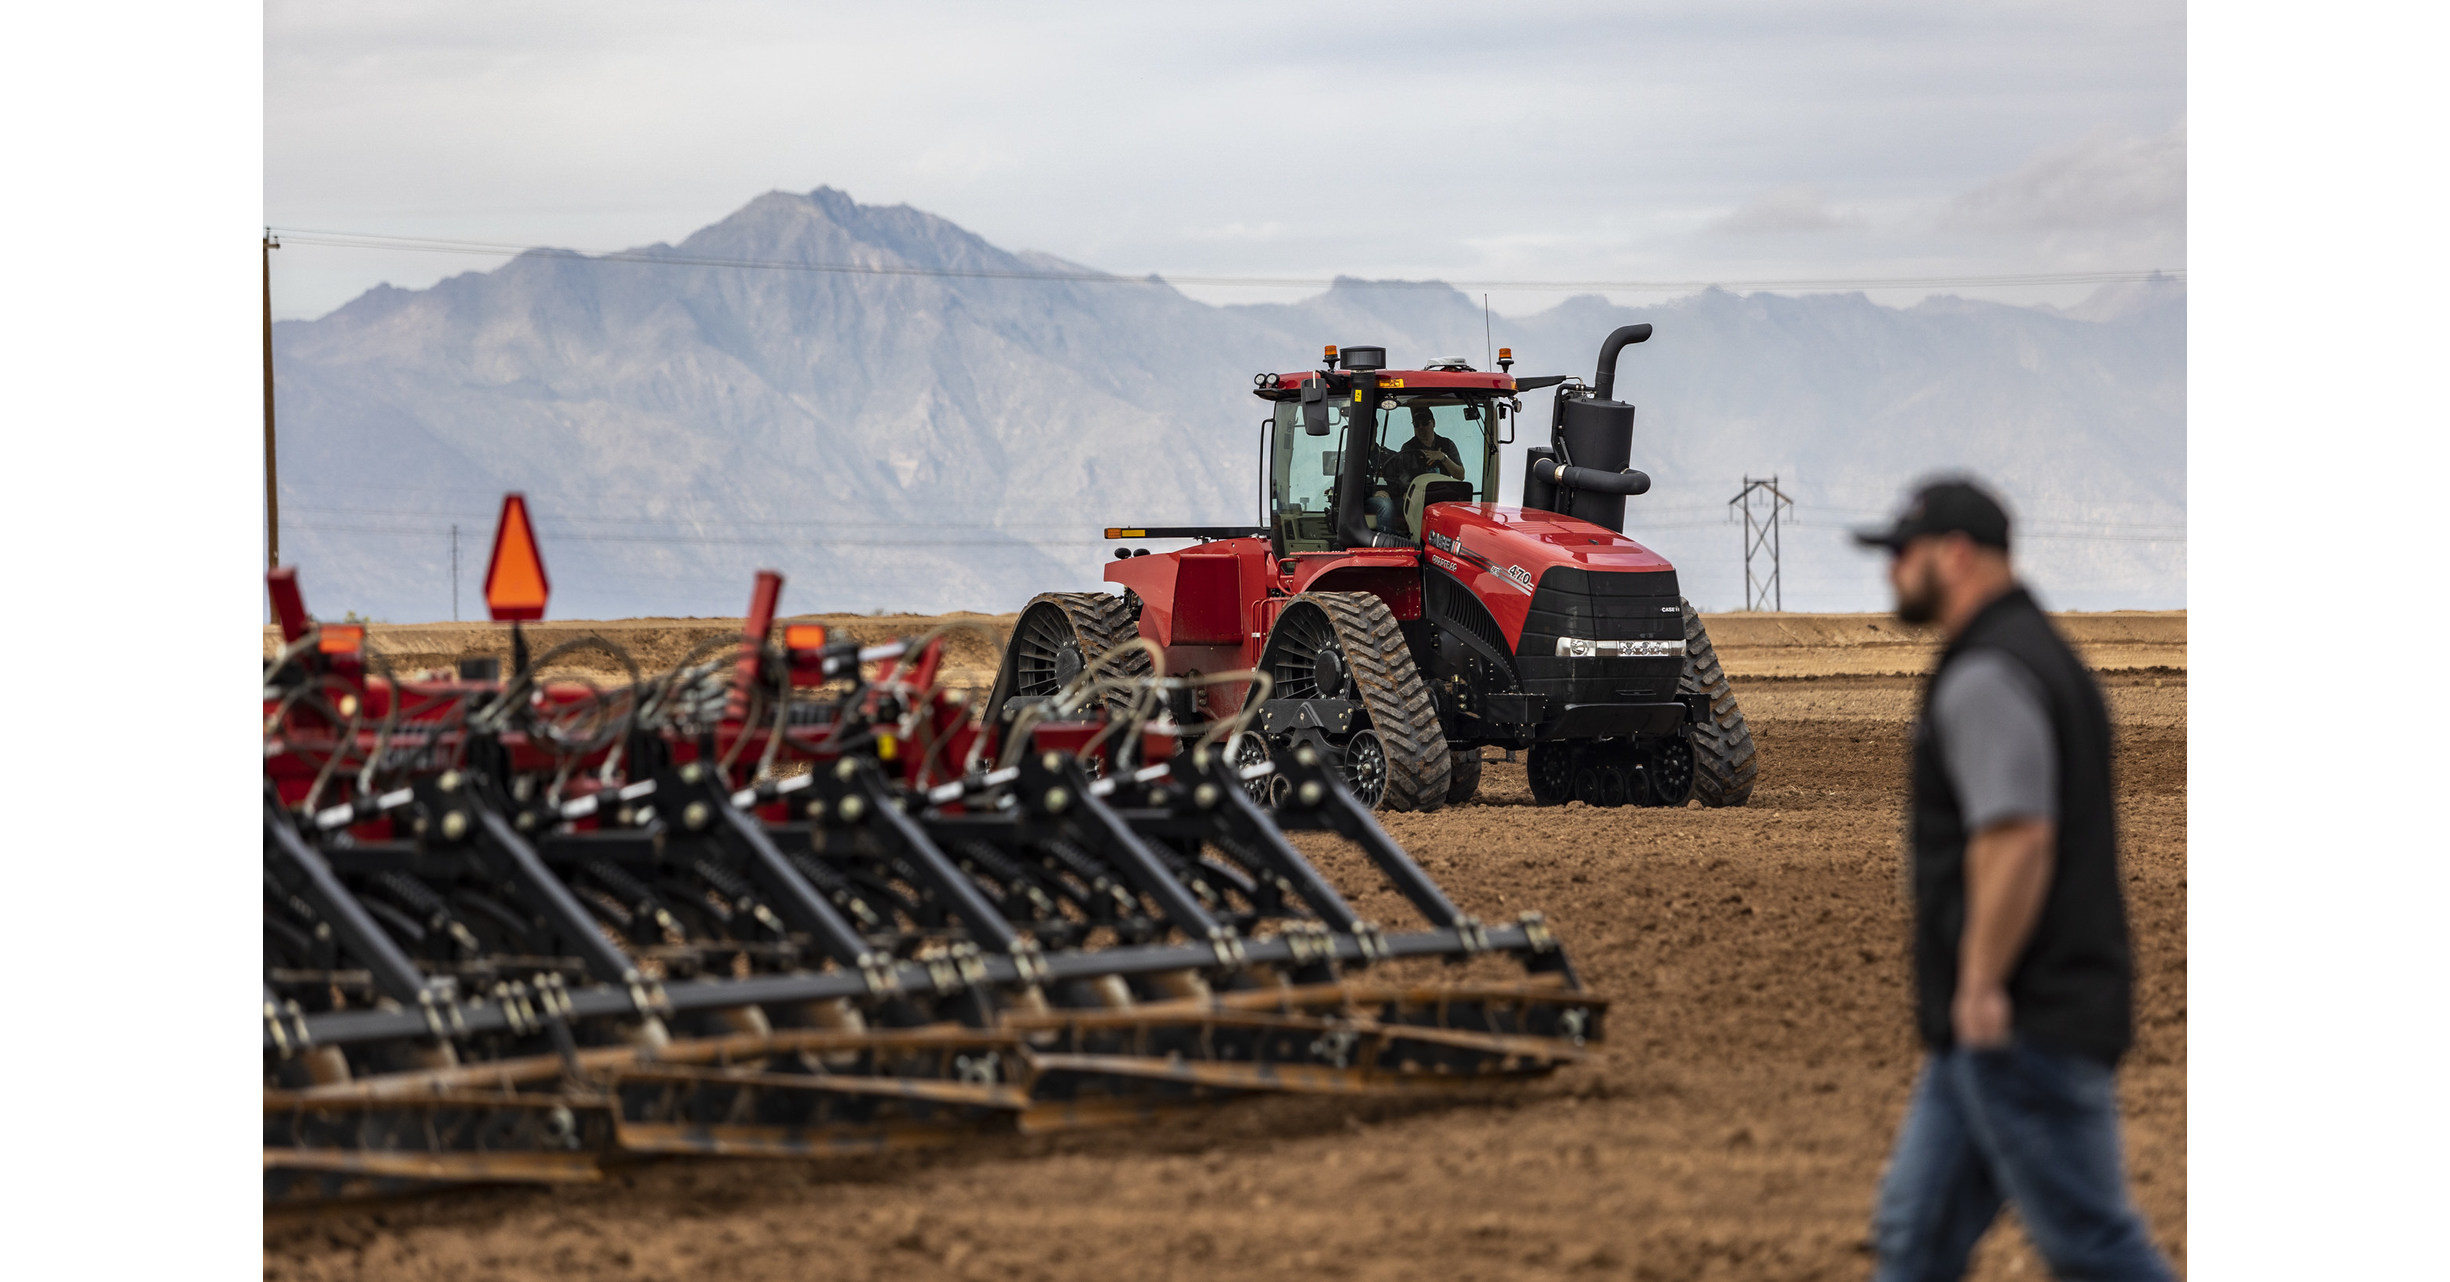 About Case IH